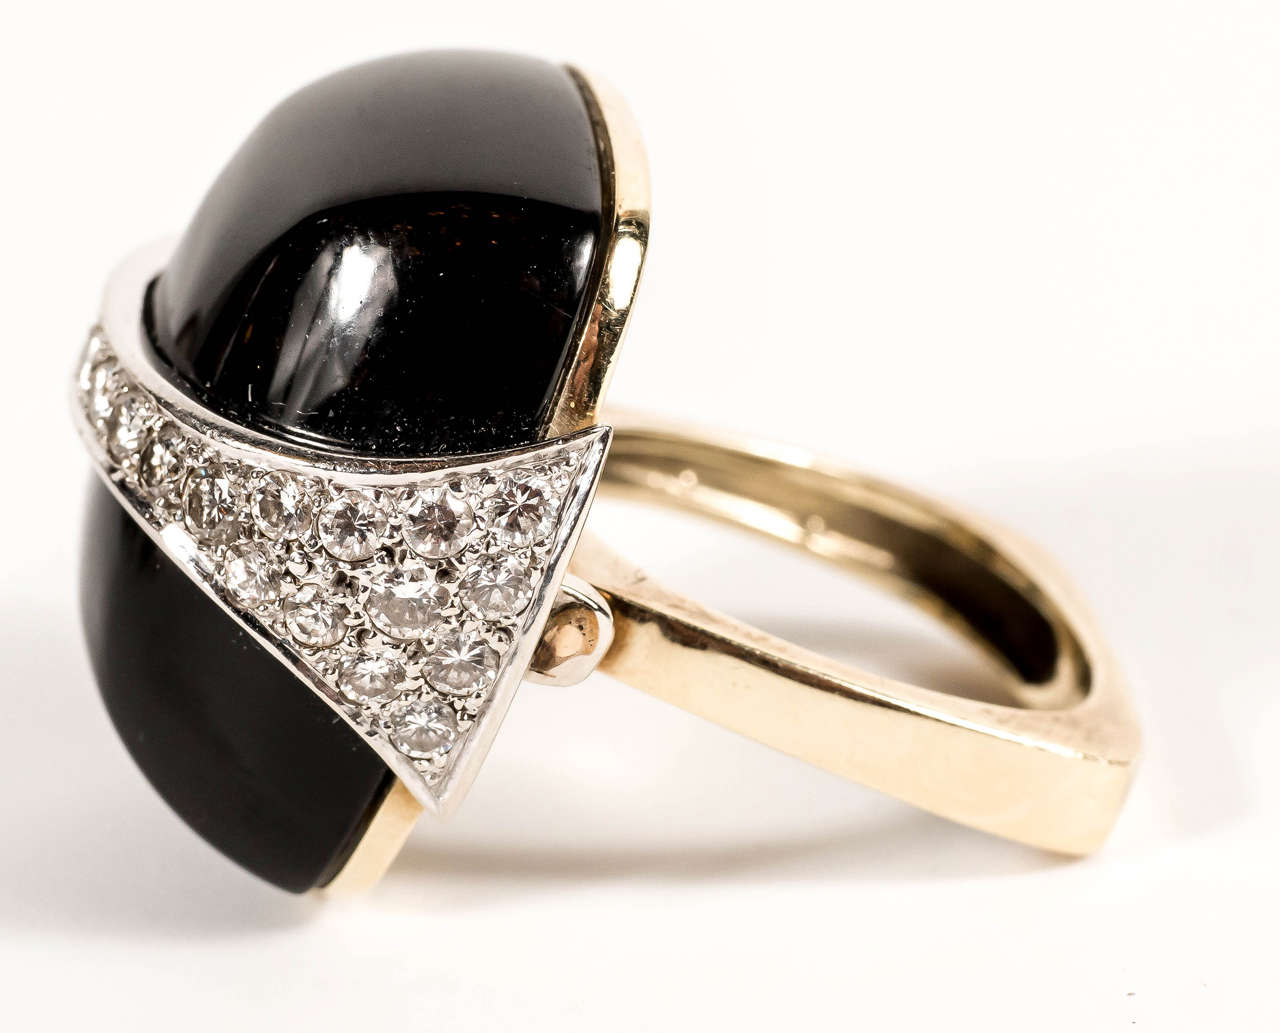 Modernist Strong and Bold 1970s La Triomphe Black Onyx Diamond Gold Ring